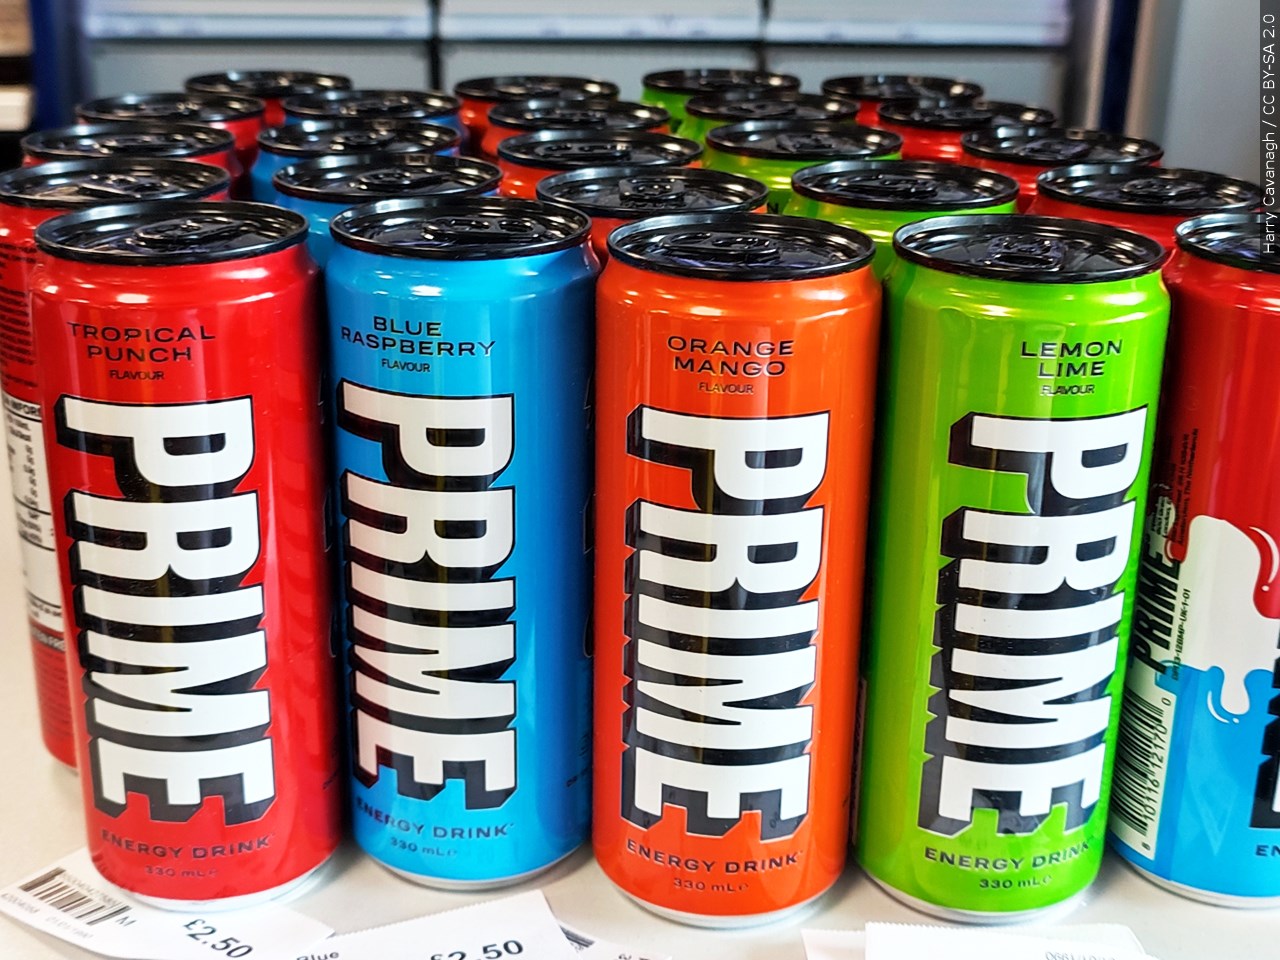 FDA being asked to look into r's caffeine-loaded energy drink - WVUA  23